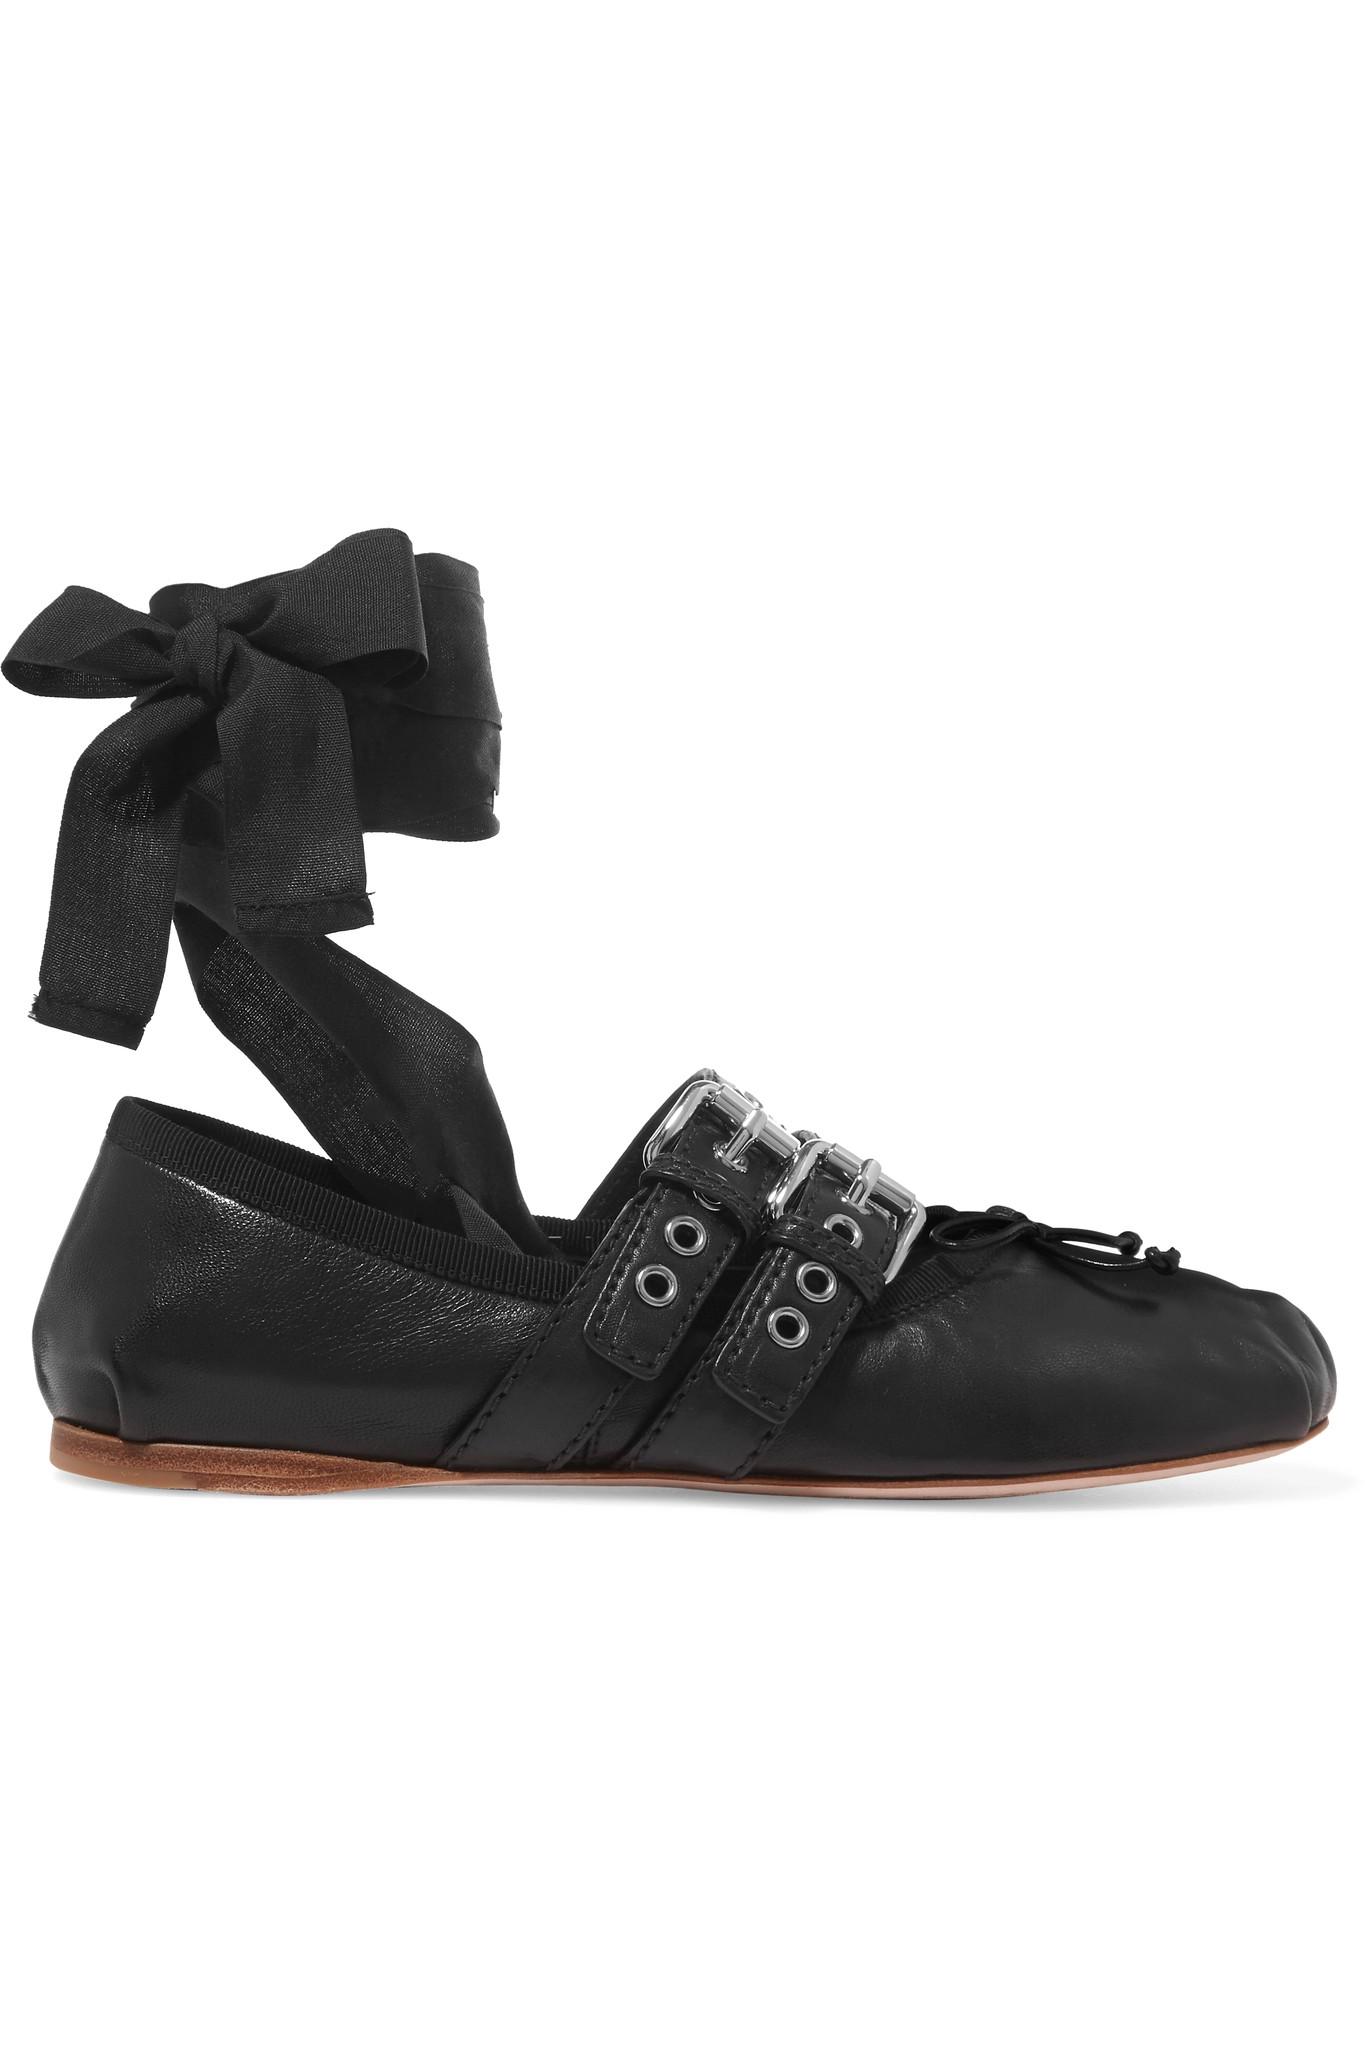 Miu miu Lace-up Leather Ballet Flats in Black | Lyst